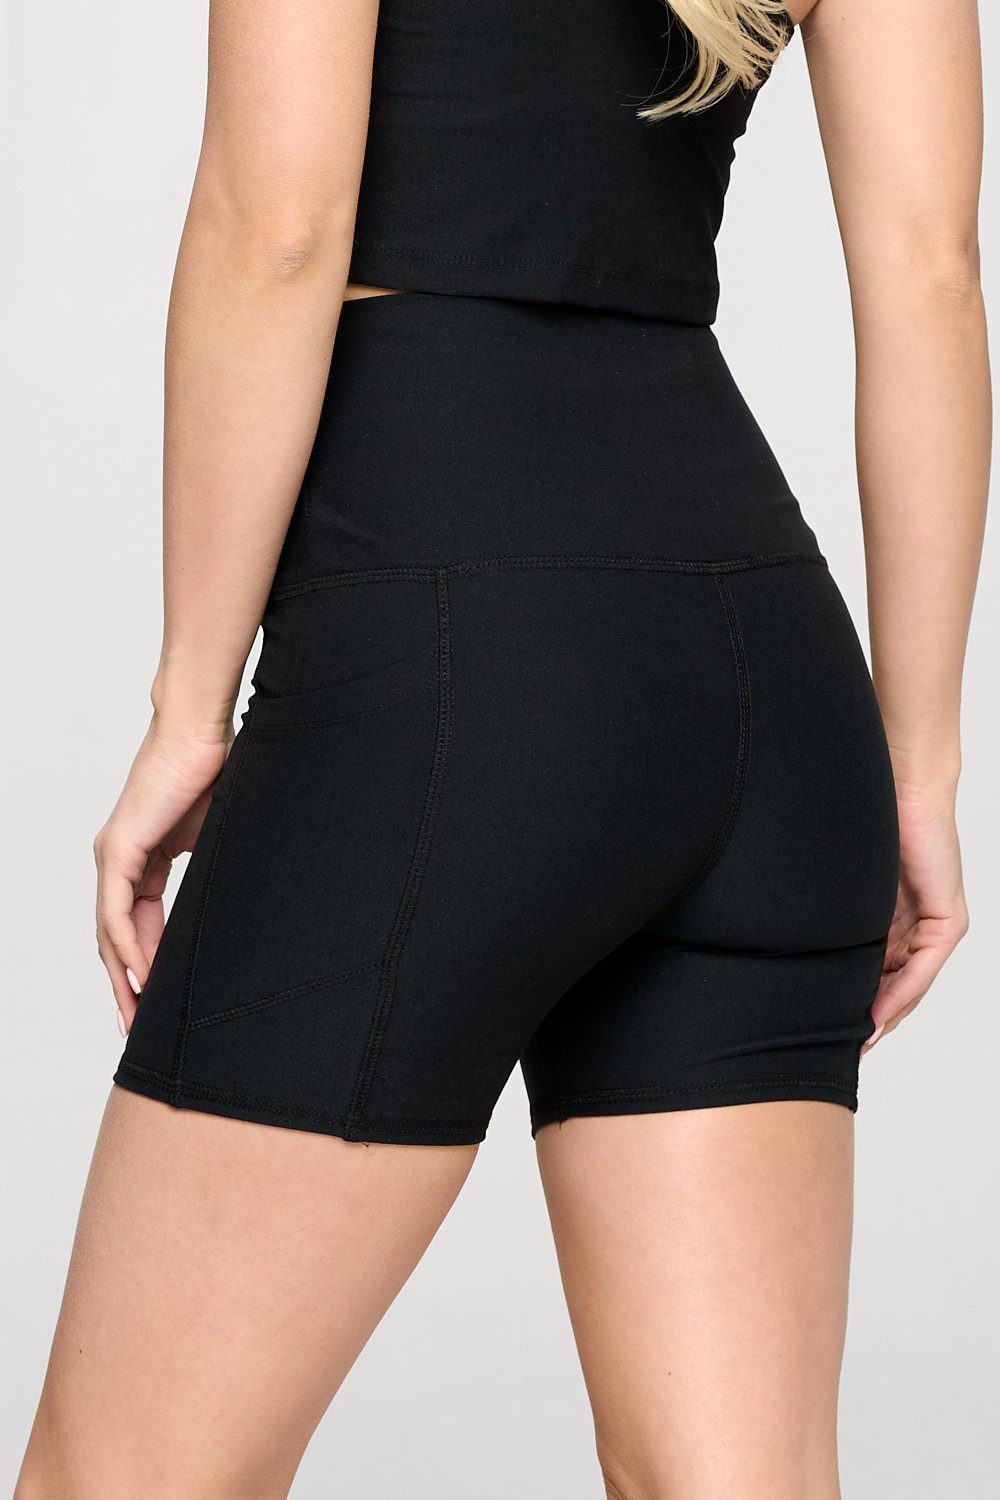 Mia Shorts - Black w Pockets 5" (HIGH-WAIST SLIM COLLECTION) SIZE UP - LIMITED EDITION -